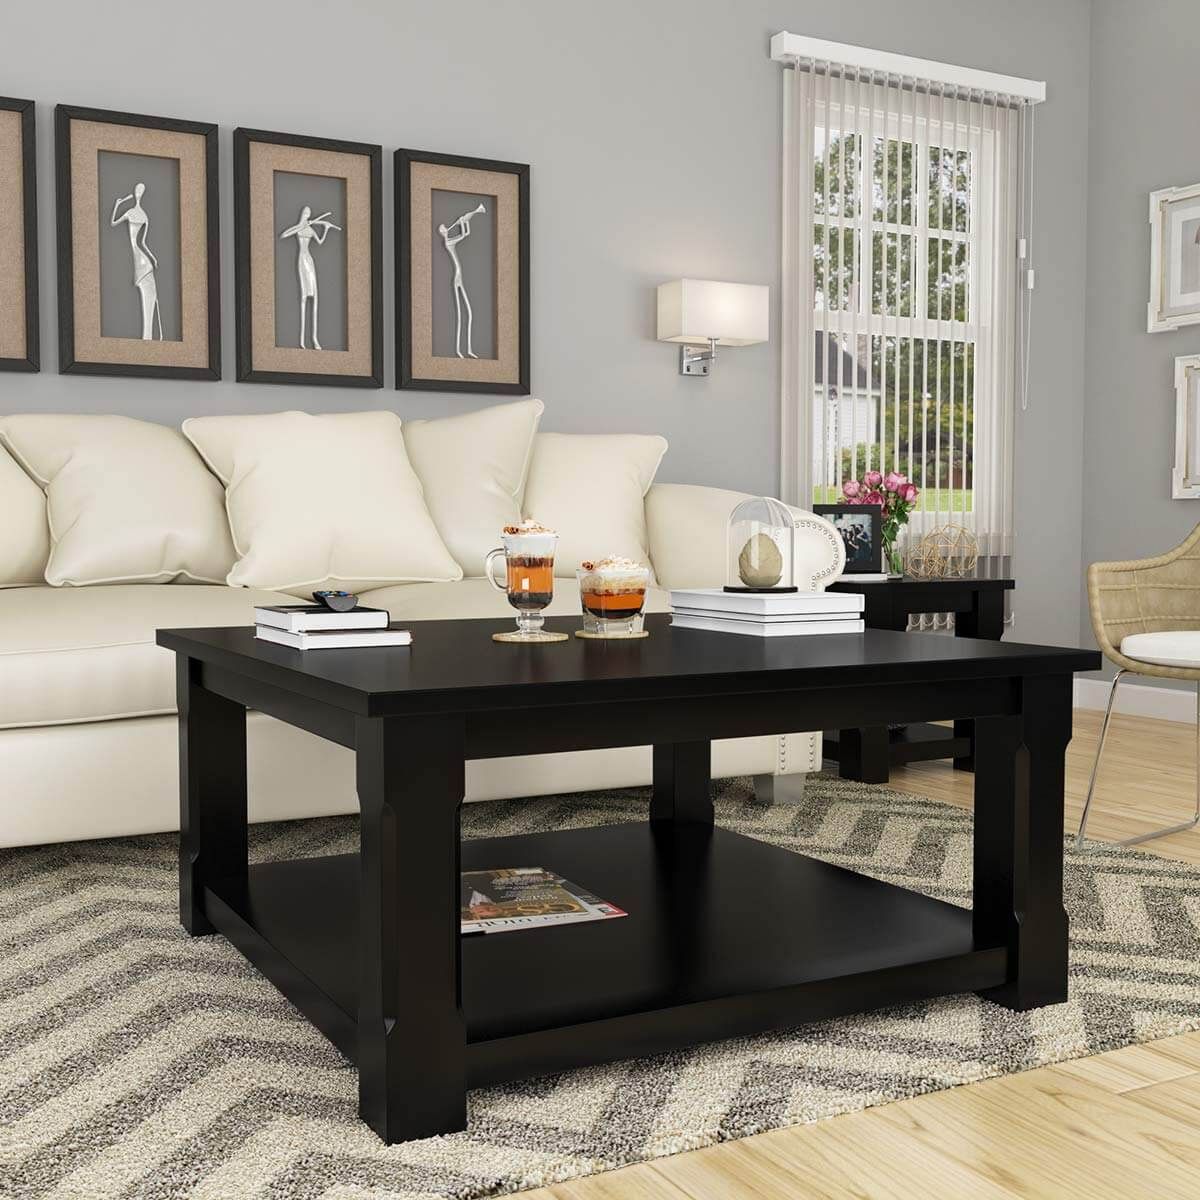 Brimson Solid Wood 2 Tier Black Square Coffee Table (View 8 of 15)